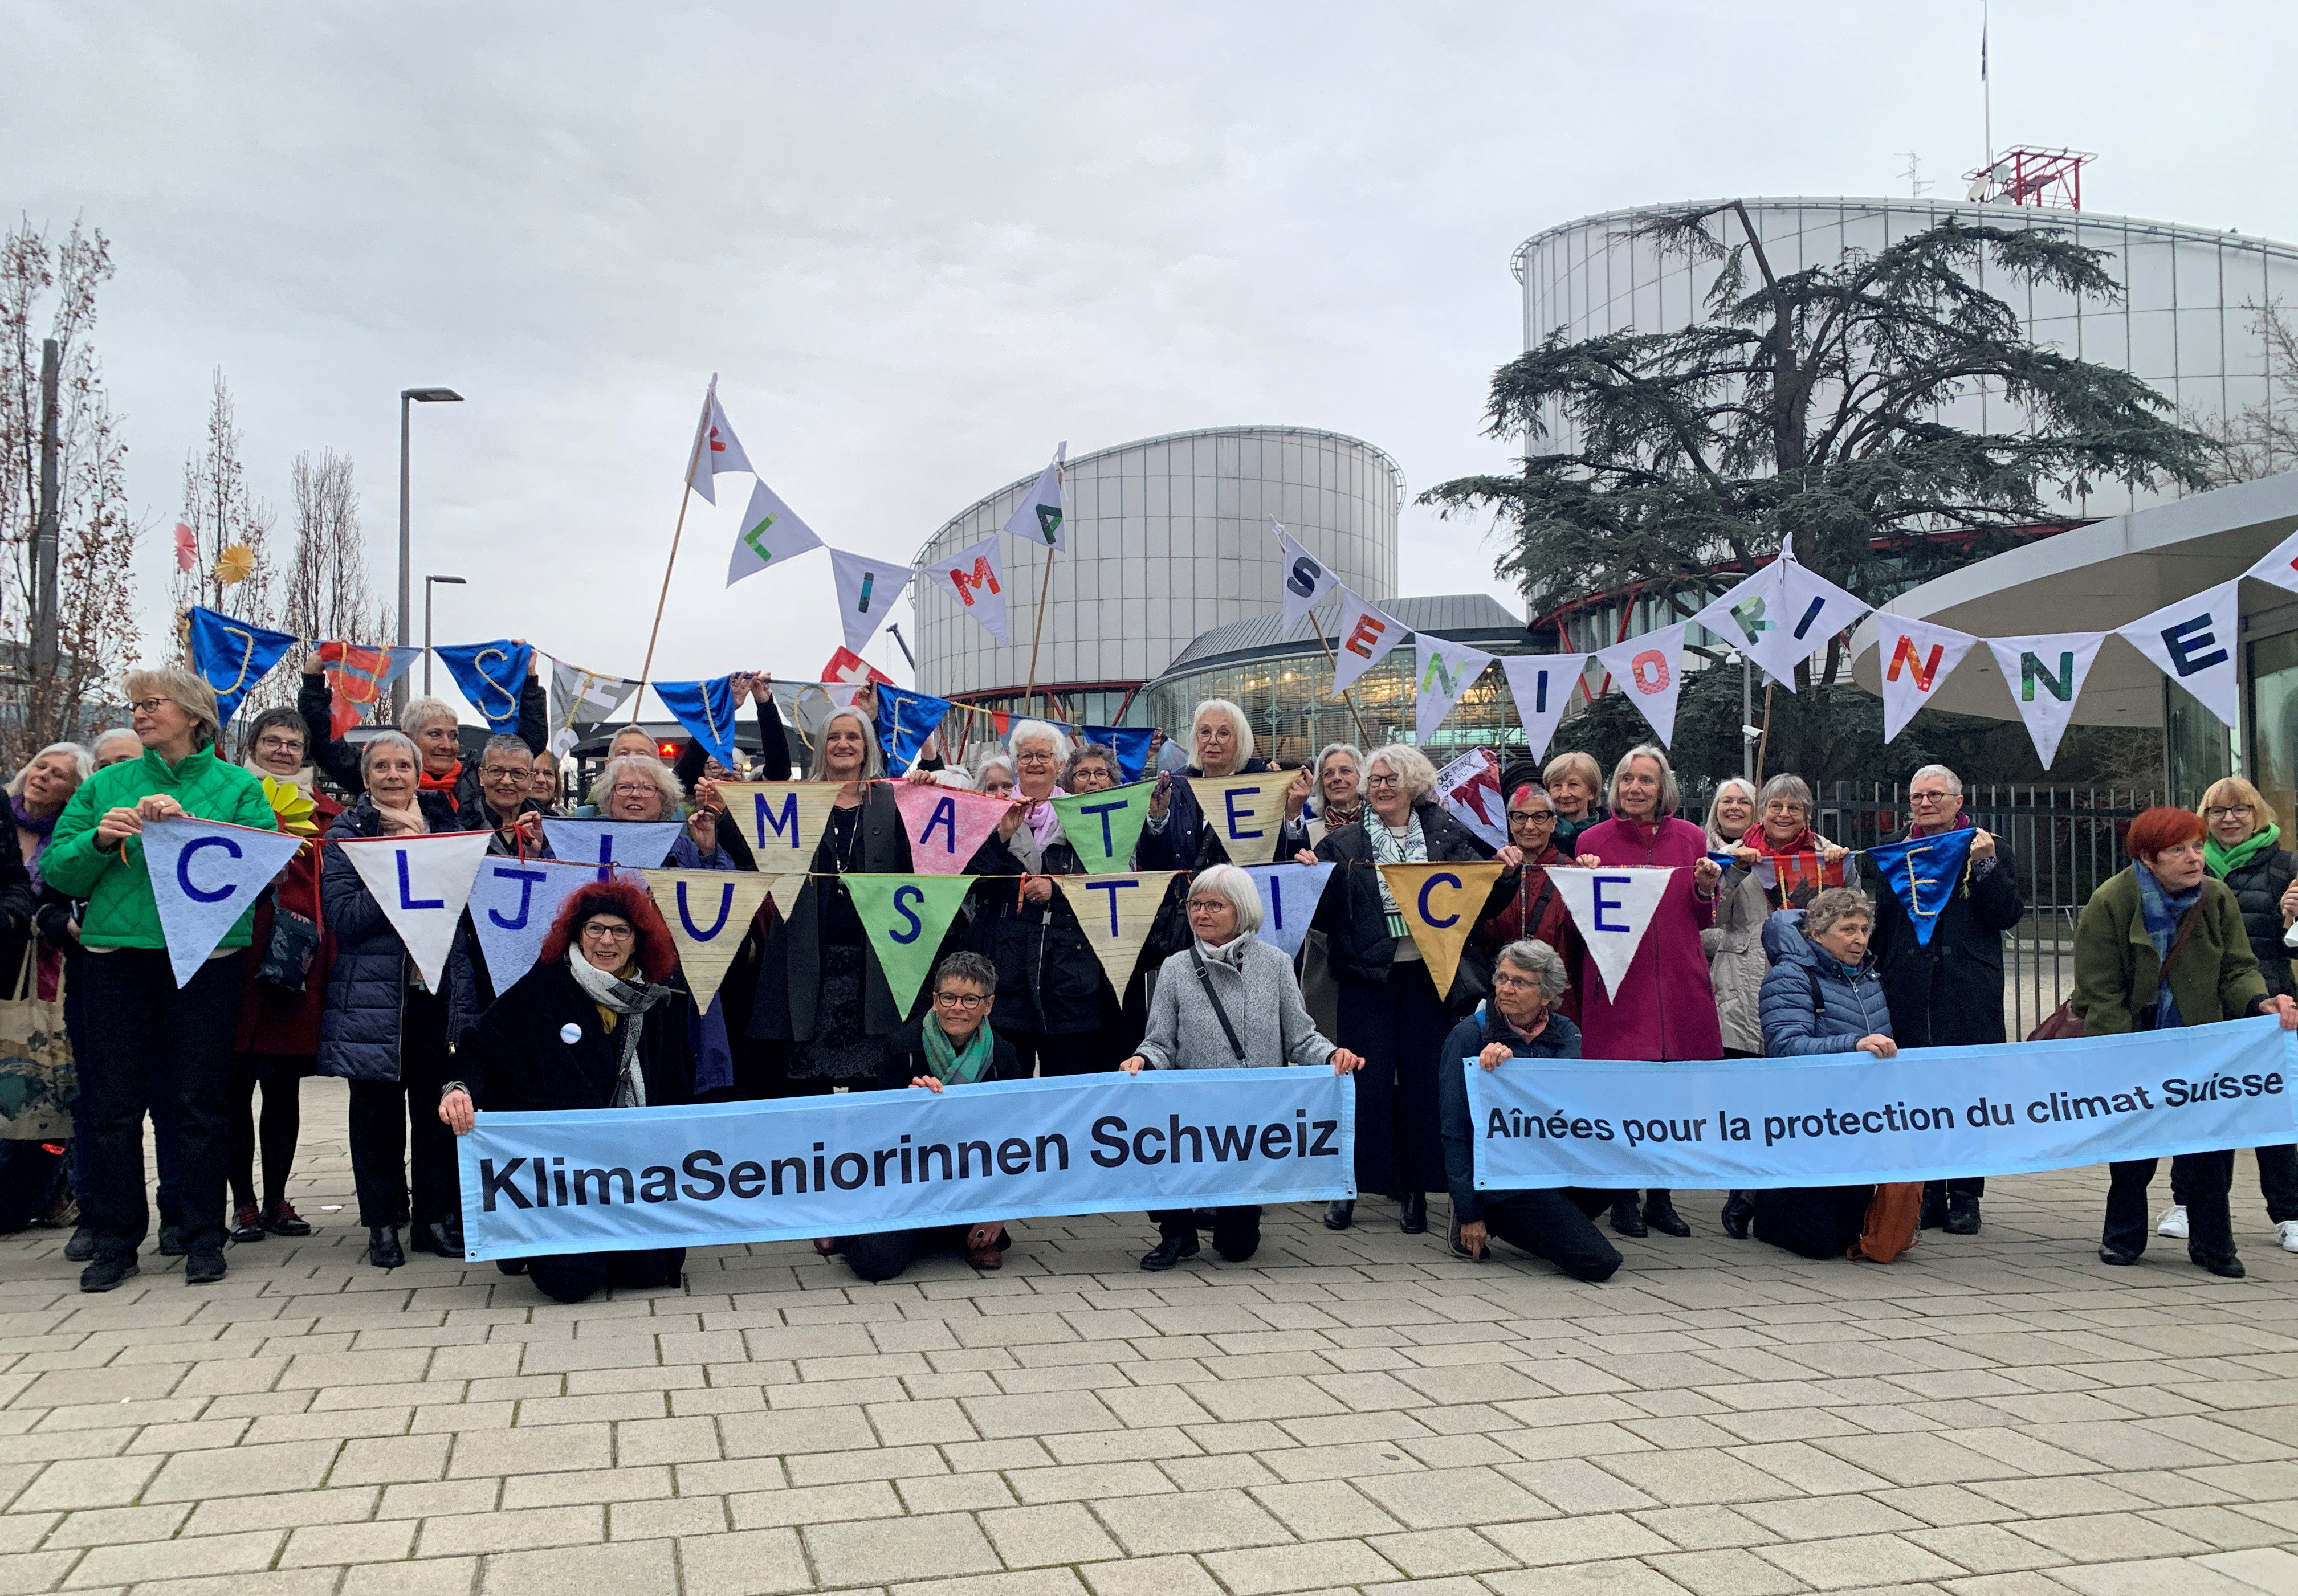 A group from the Senior Women for Climate Protection association hold banners outside the European Court of Human Rights in Strasbourg